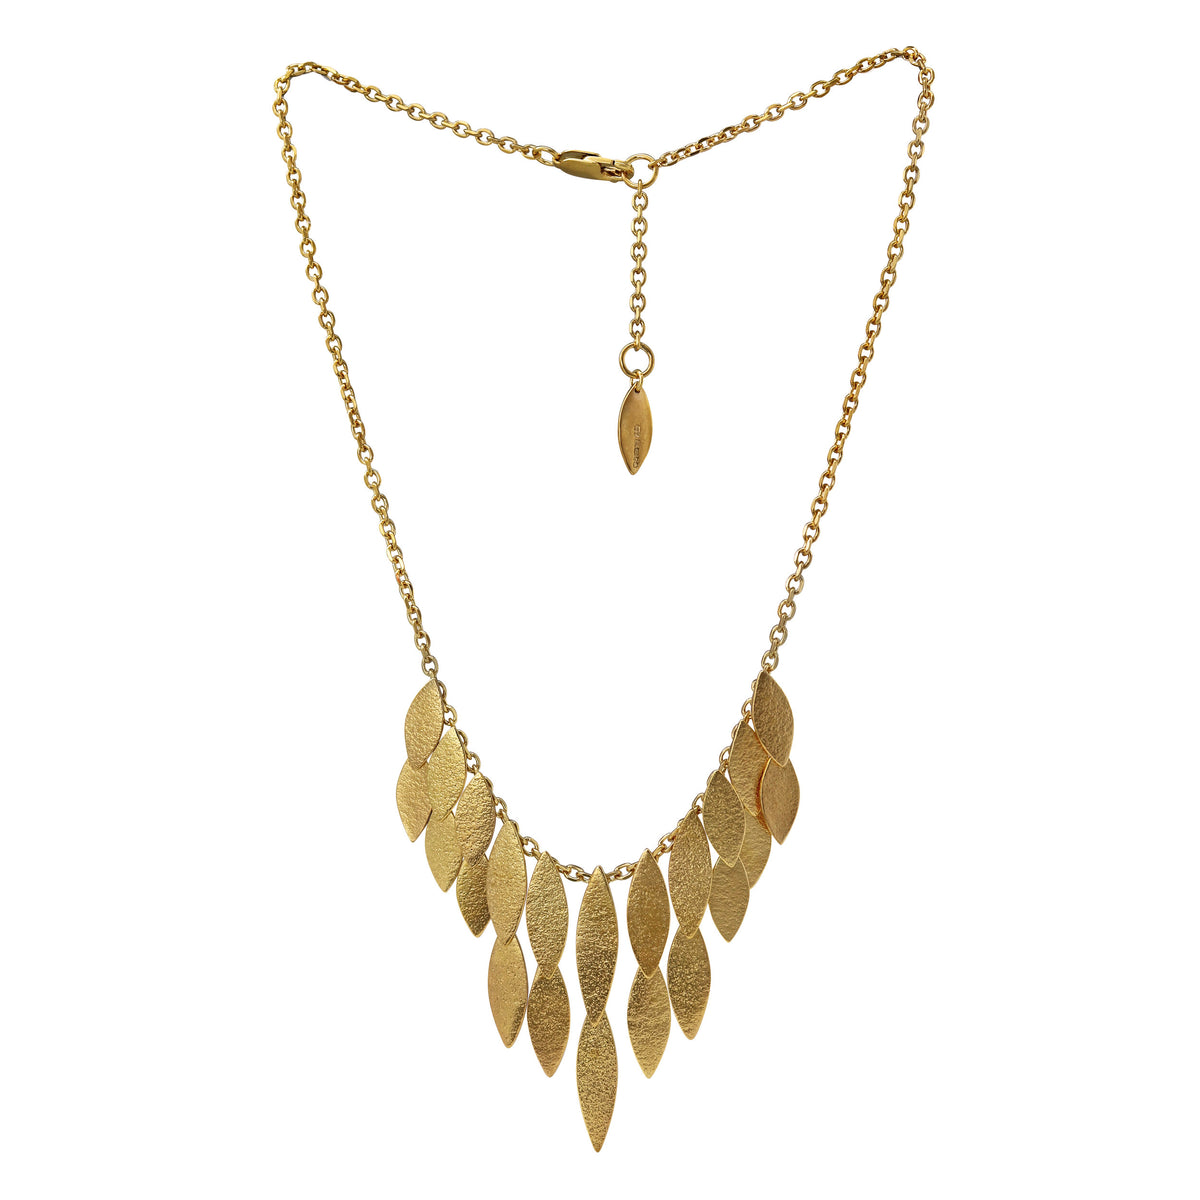 Cara Tonkin Gold Icarus Waterfall Necklace